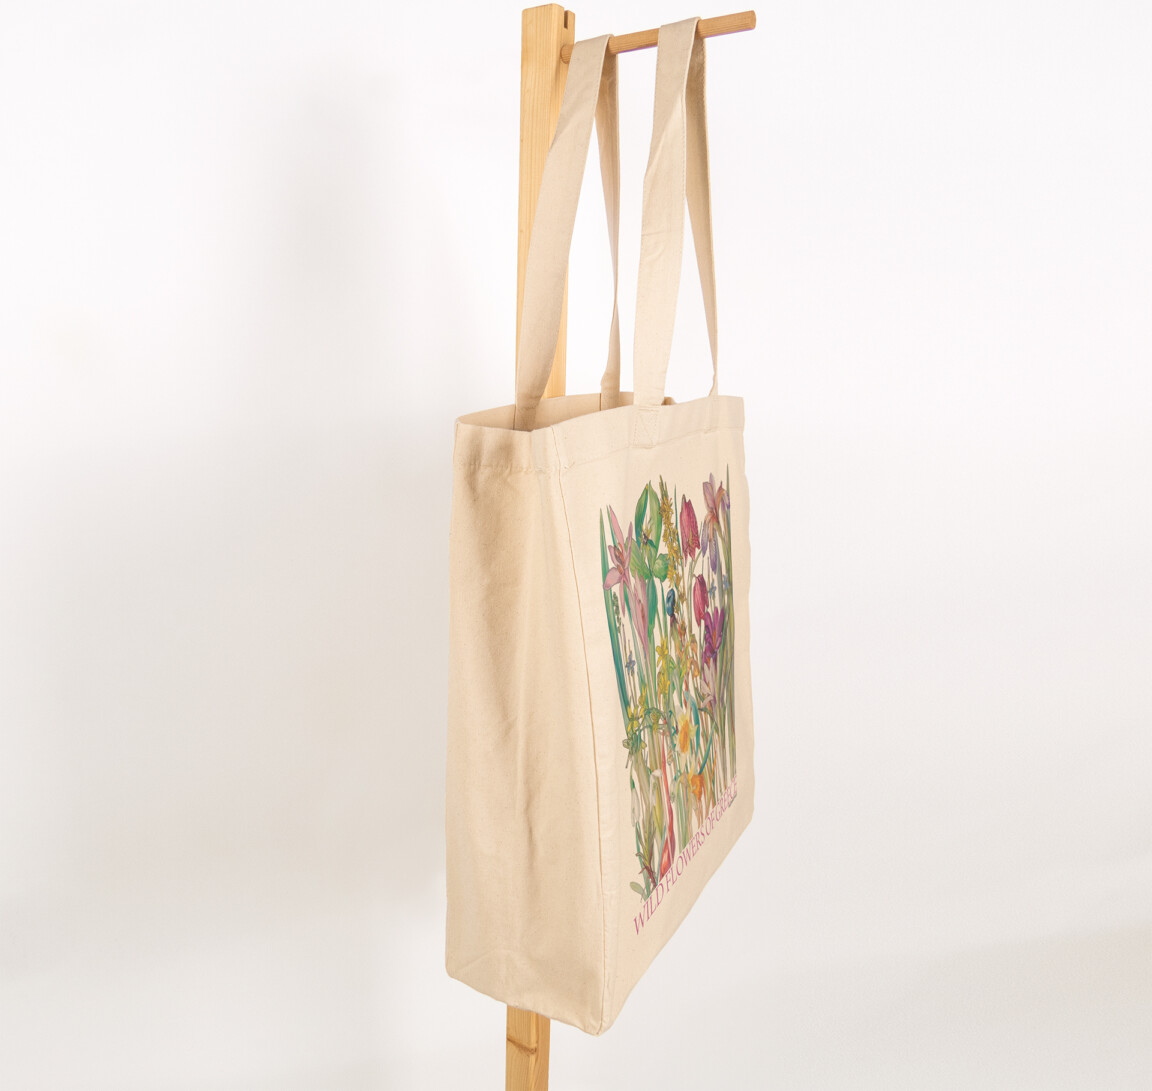 canvas bag wild flowers of greece